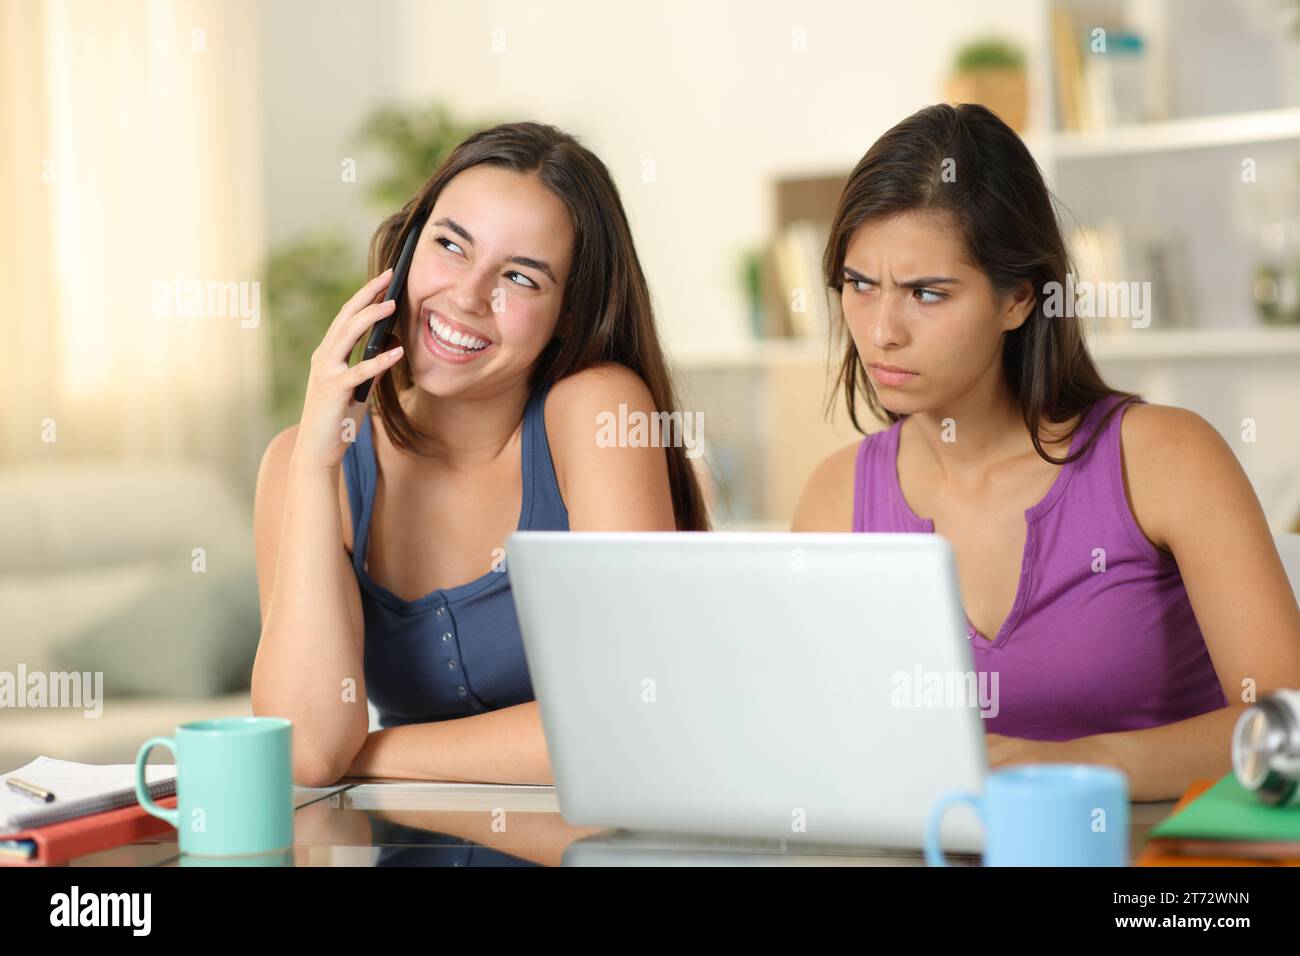 Suspicious student listening a friend talking on phone at home Stock Photo